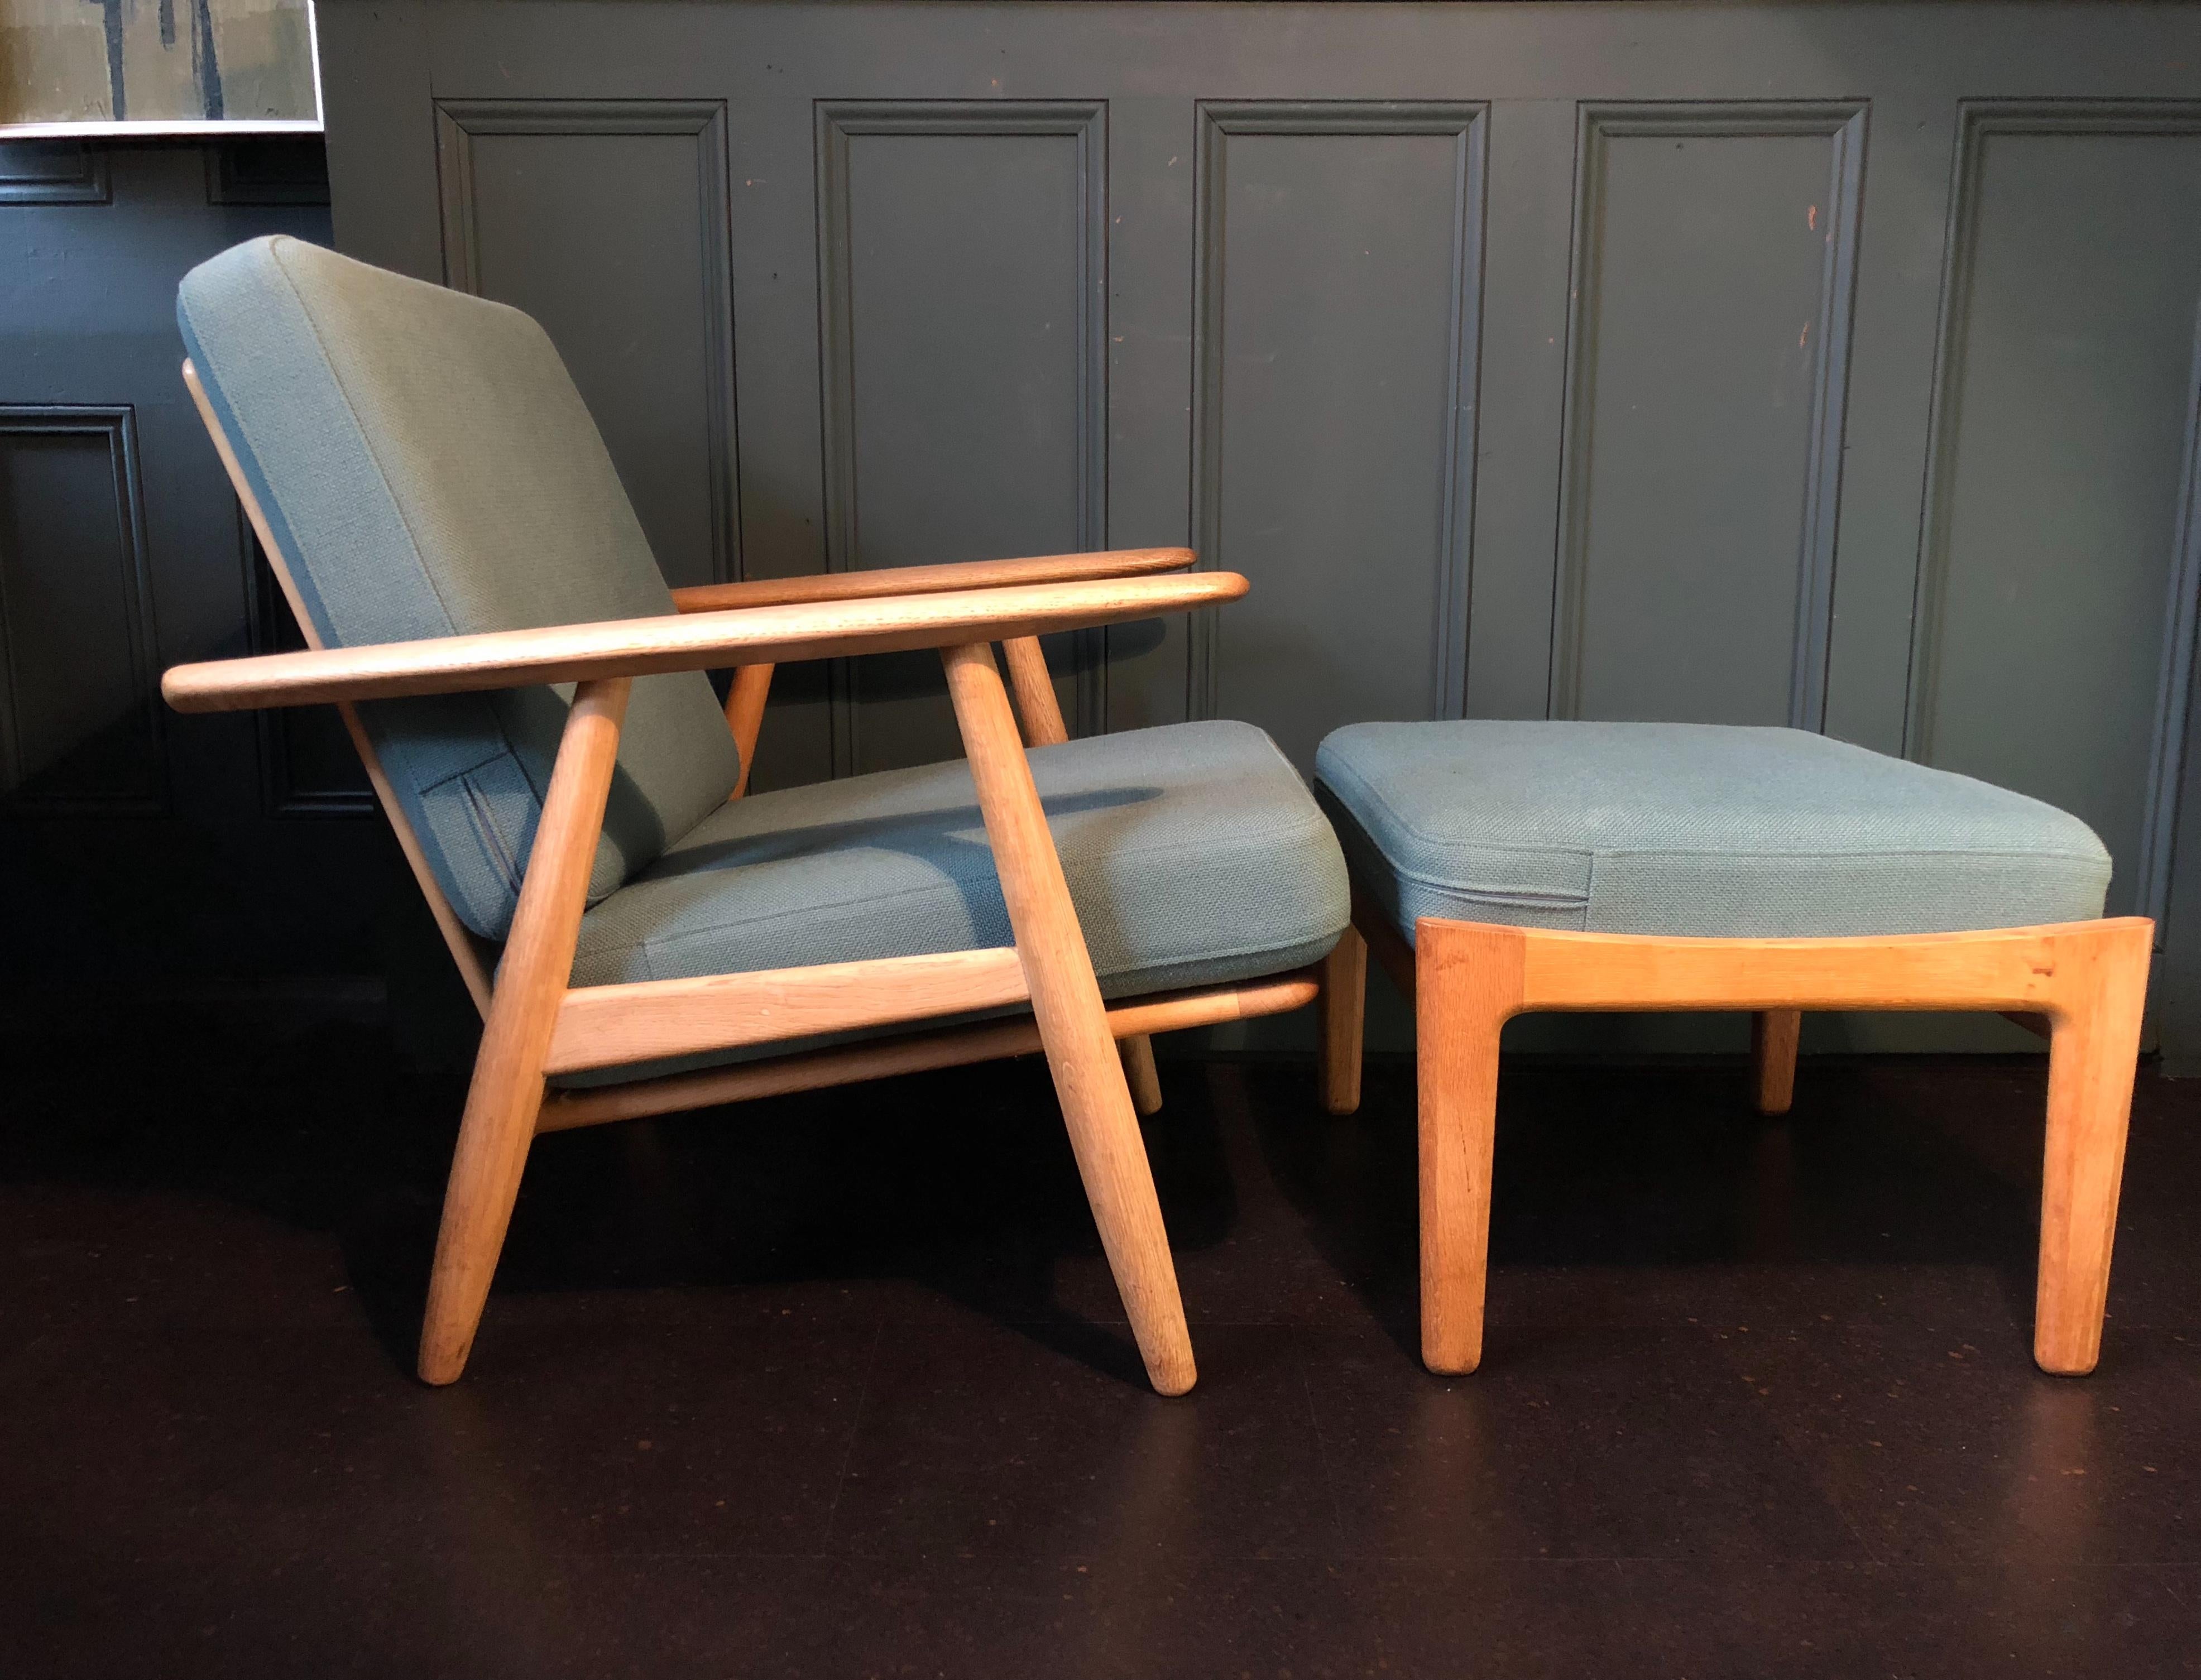 Hans Wegner ge240 cigar chairs with ottomans. Pair available. These are original 1950s models from GETAMA with makers and designers marks still intact. Constructed from European white oak. These are in magnificent condition, have been thoroughly